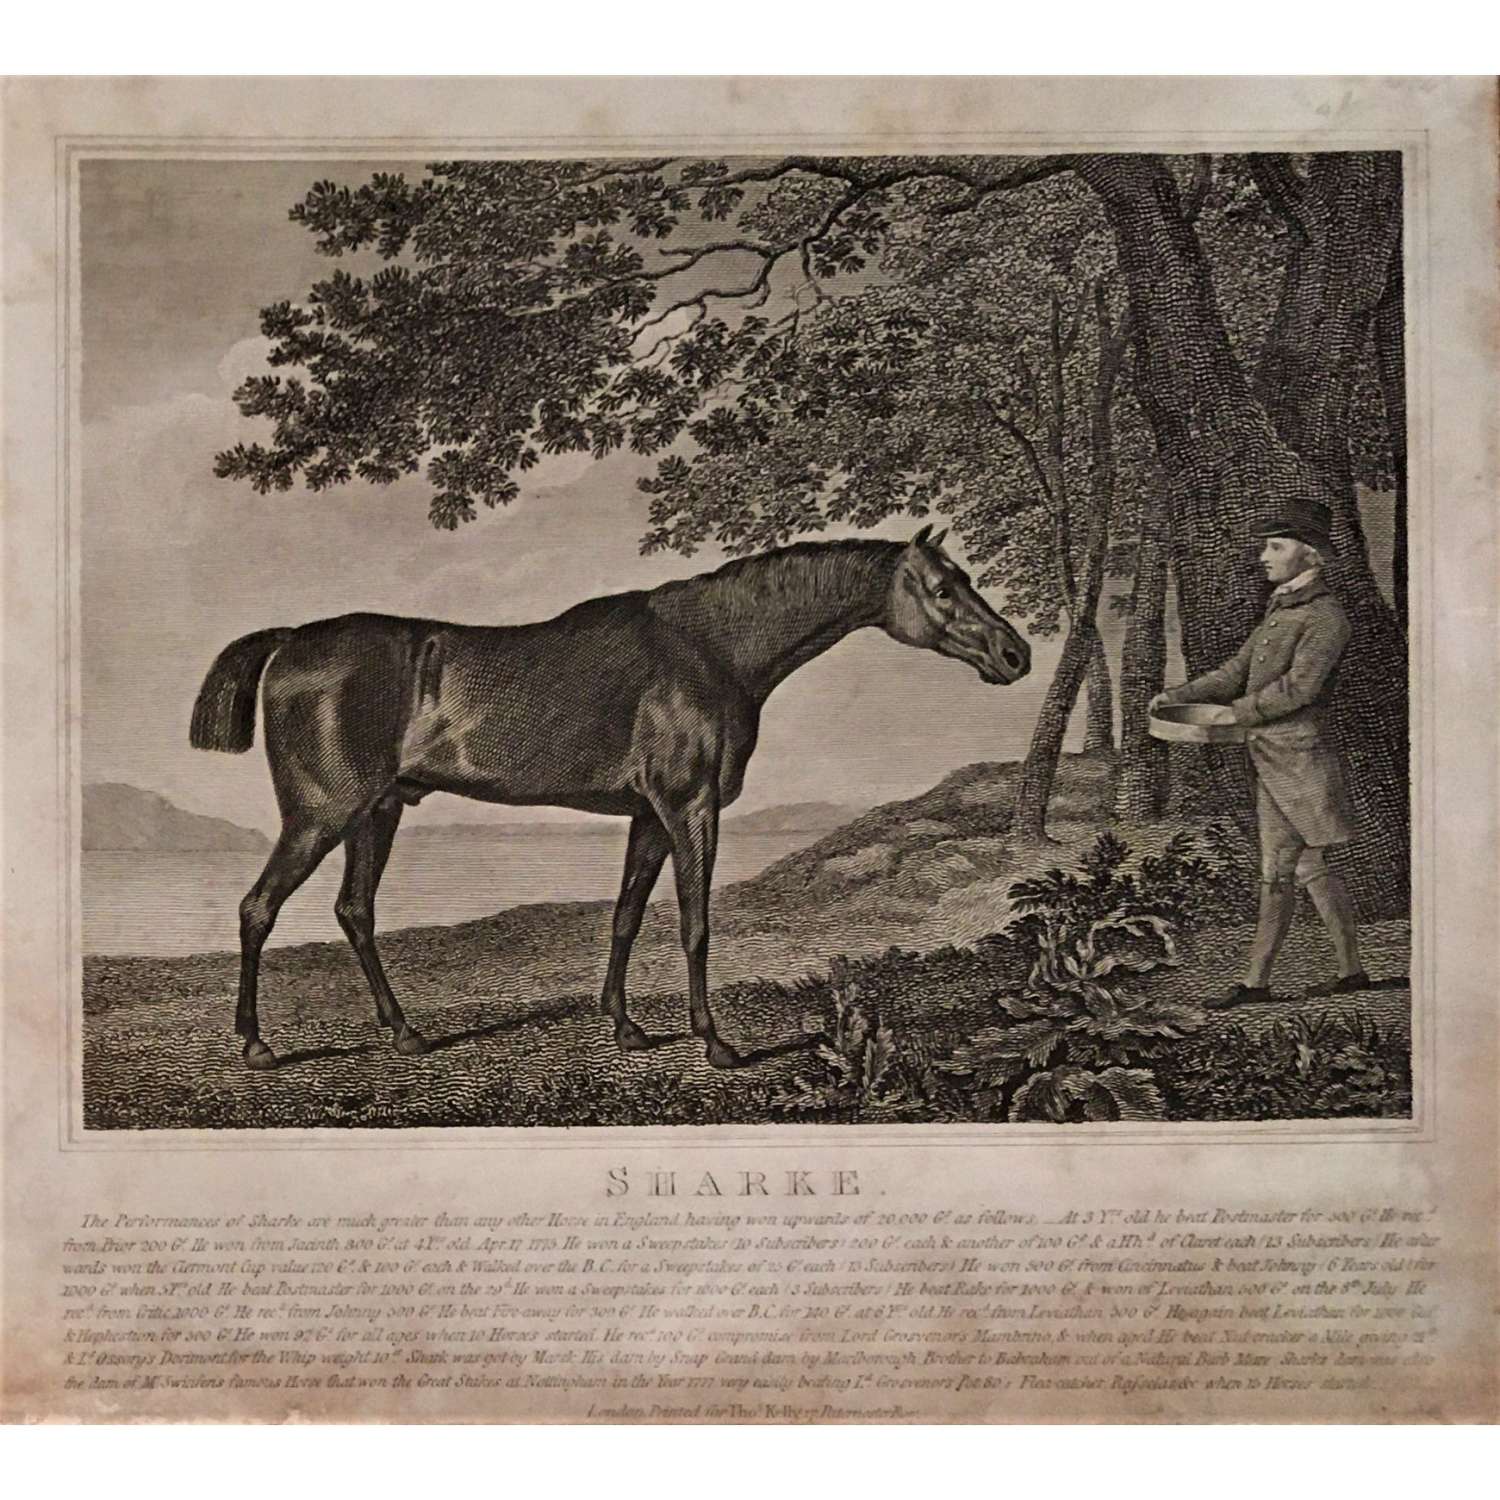 An antique print of the famous 18th Century Racehorse “Sharke